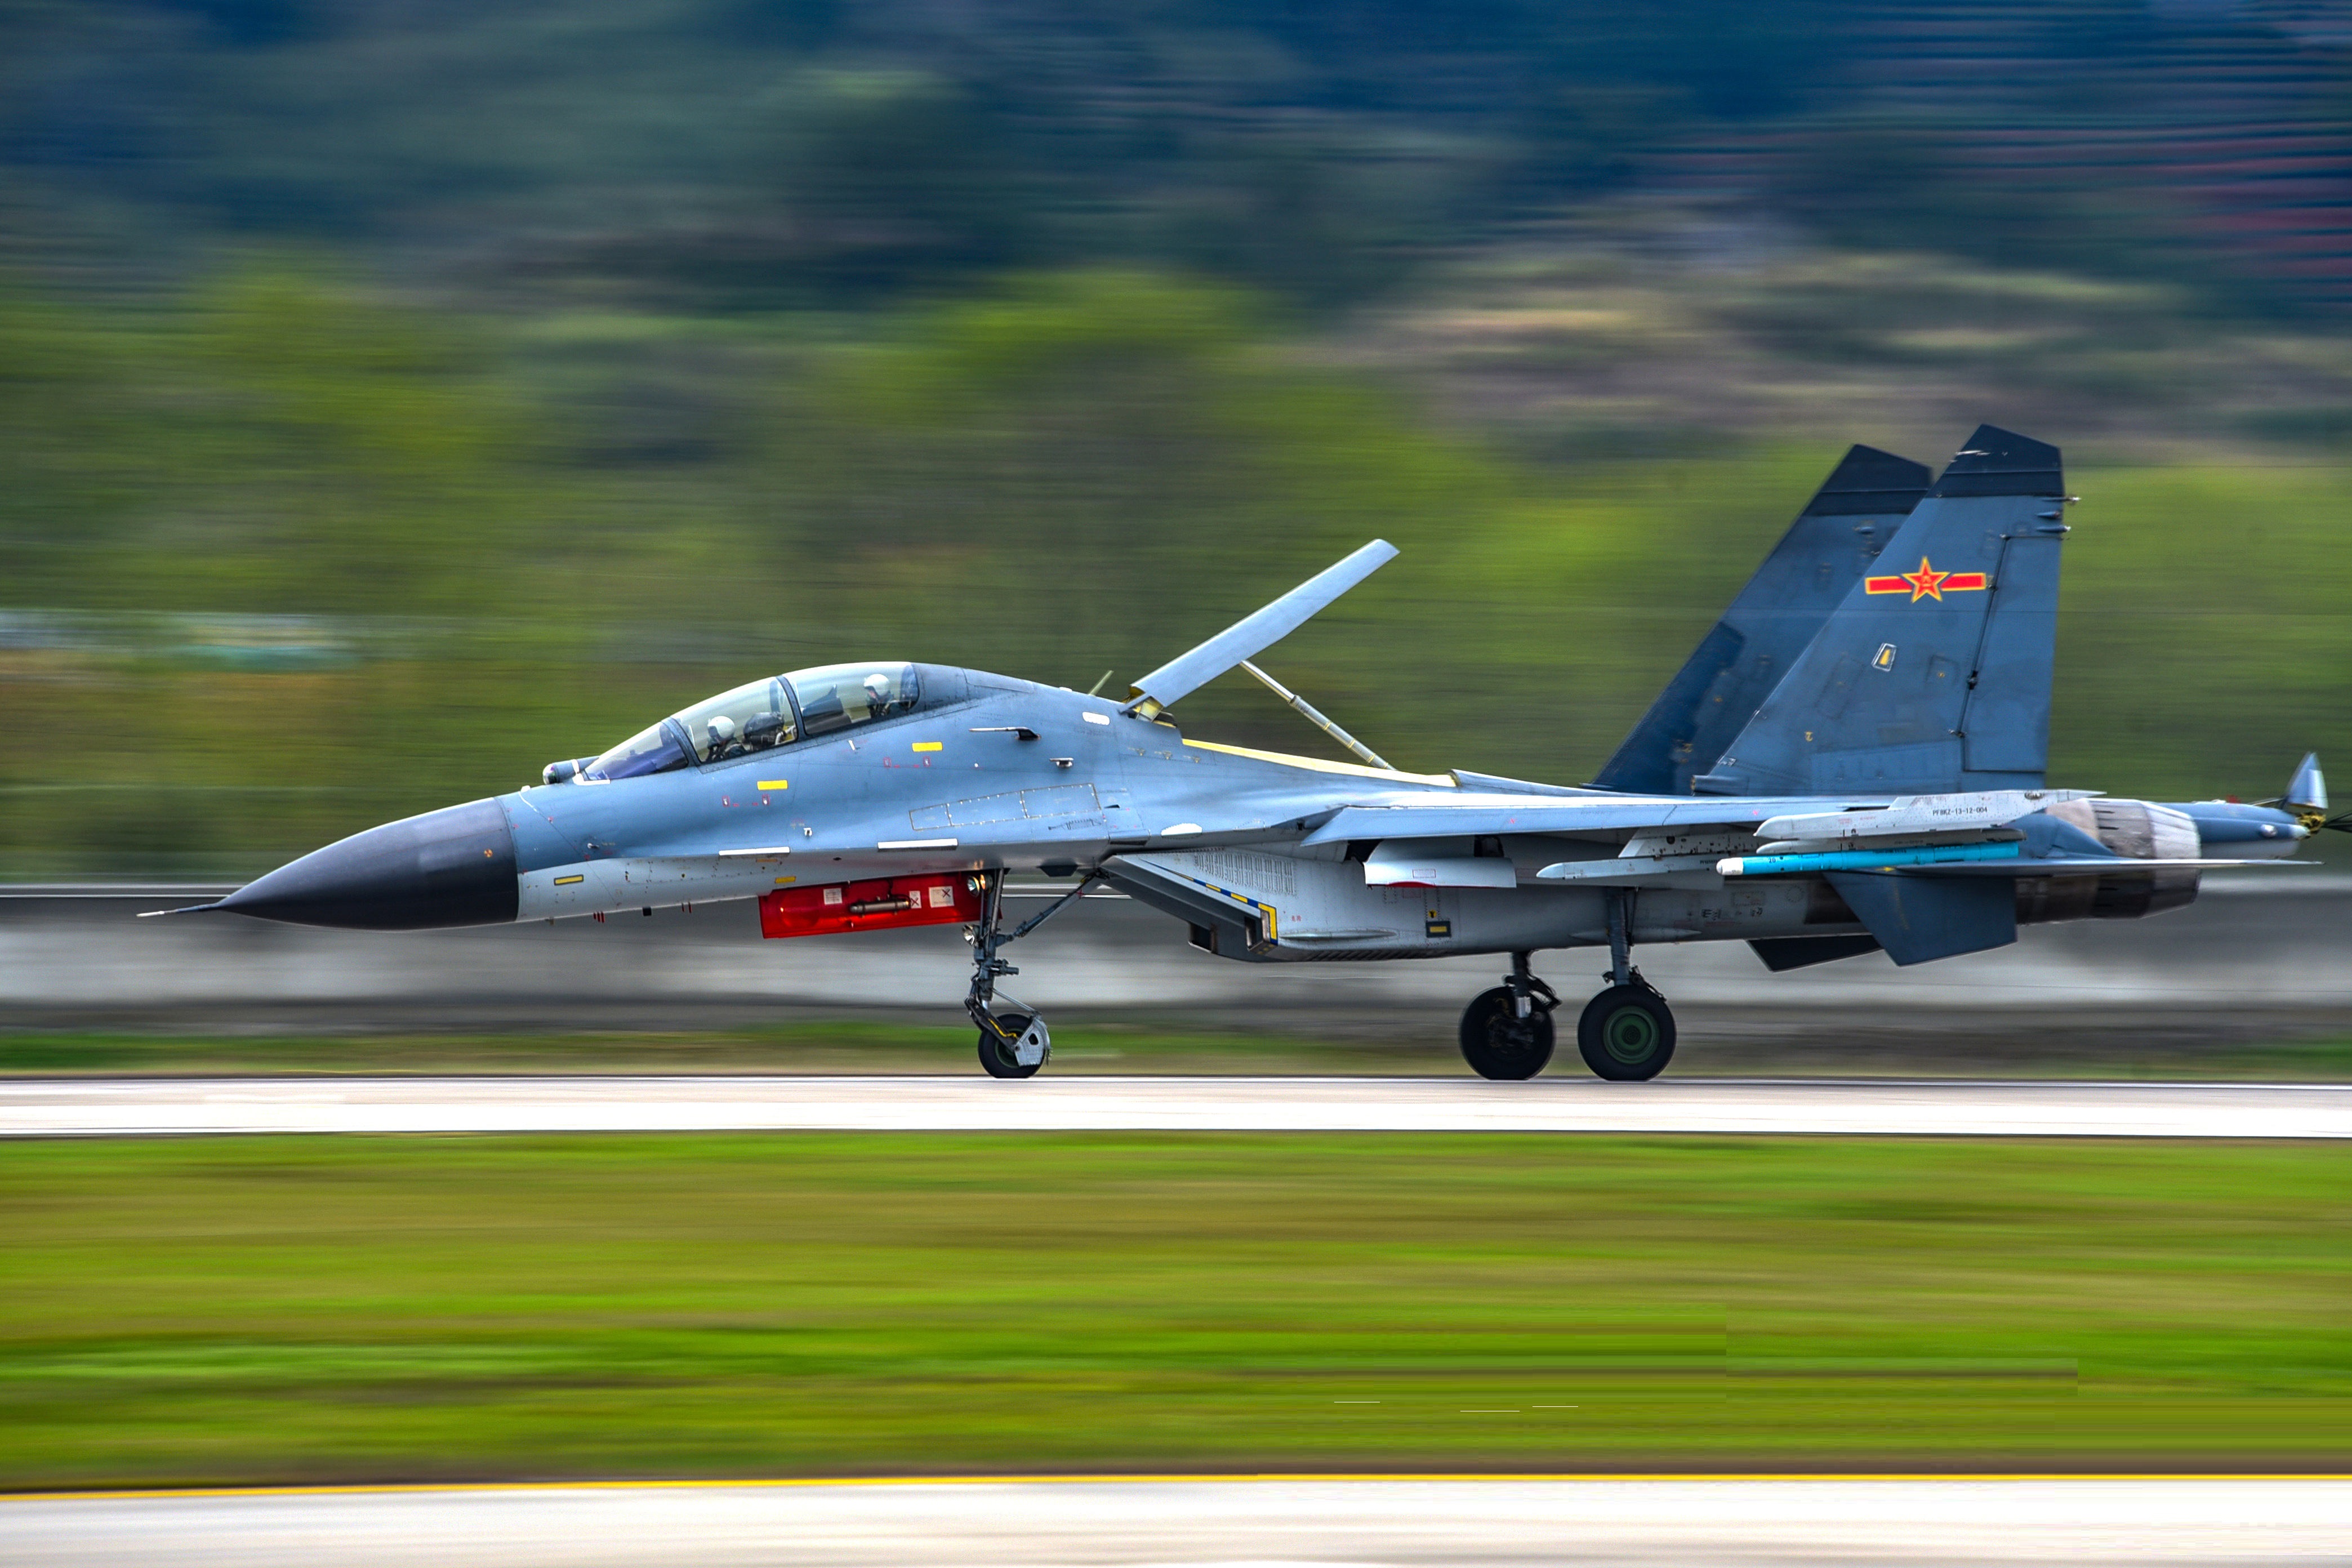 Chinese People's Liberation Army Air Force (PLAAF) Shenyang J-11 Air superiority fighter